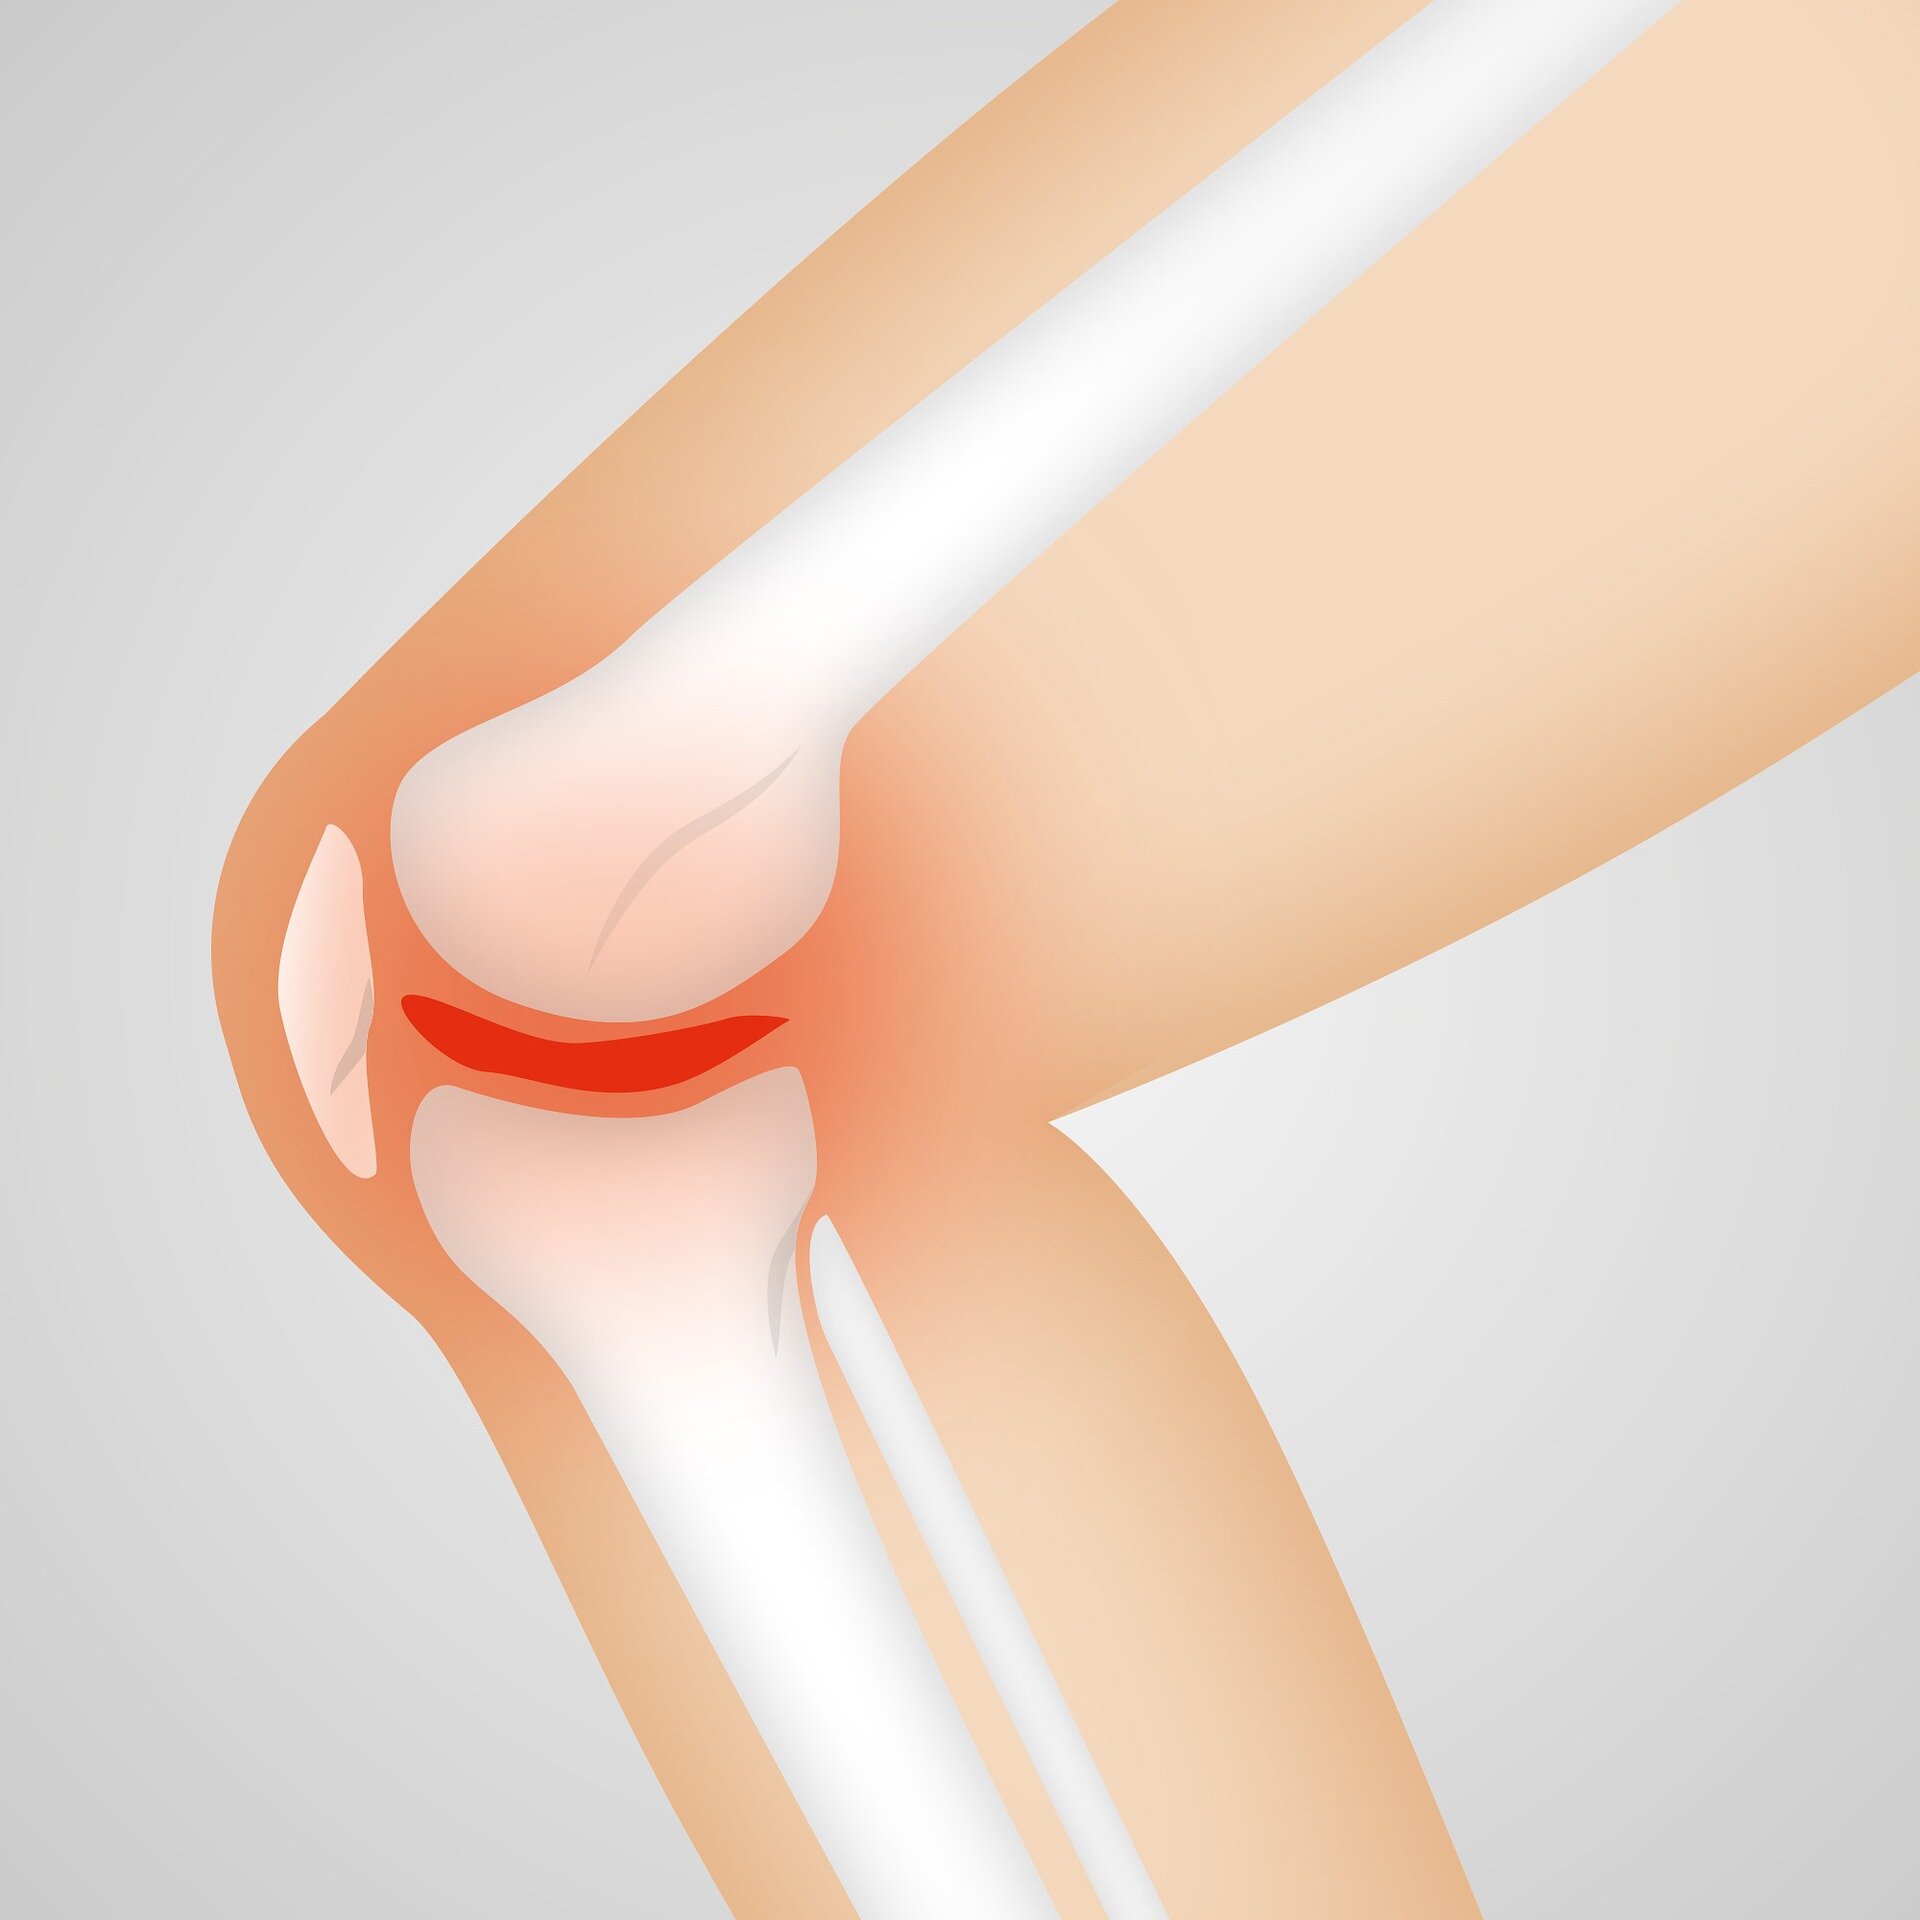 Preventing weight gain can help avoid total knee replacement